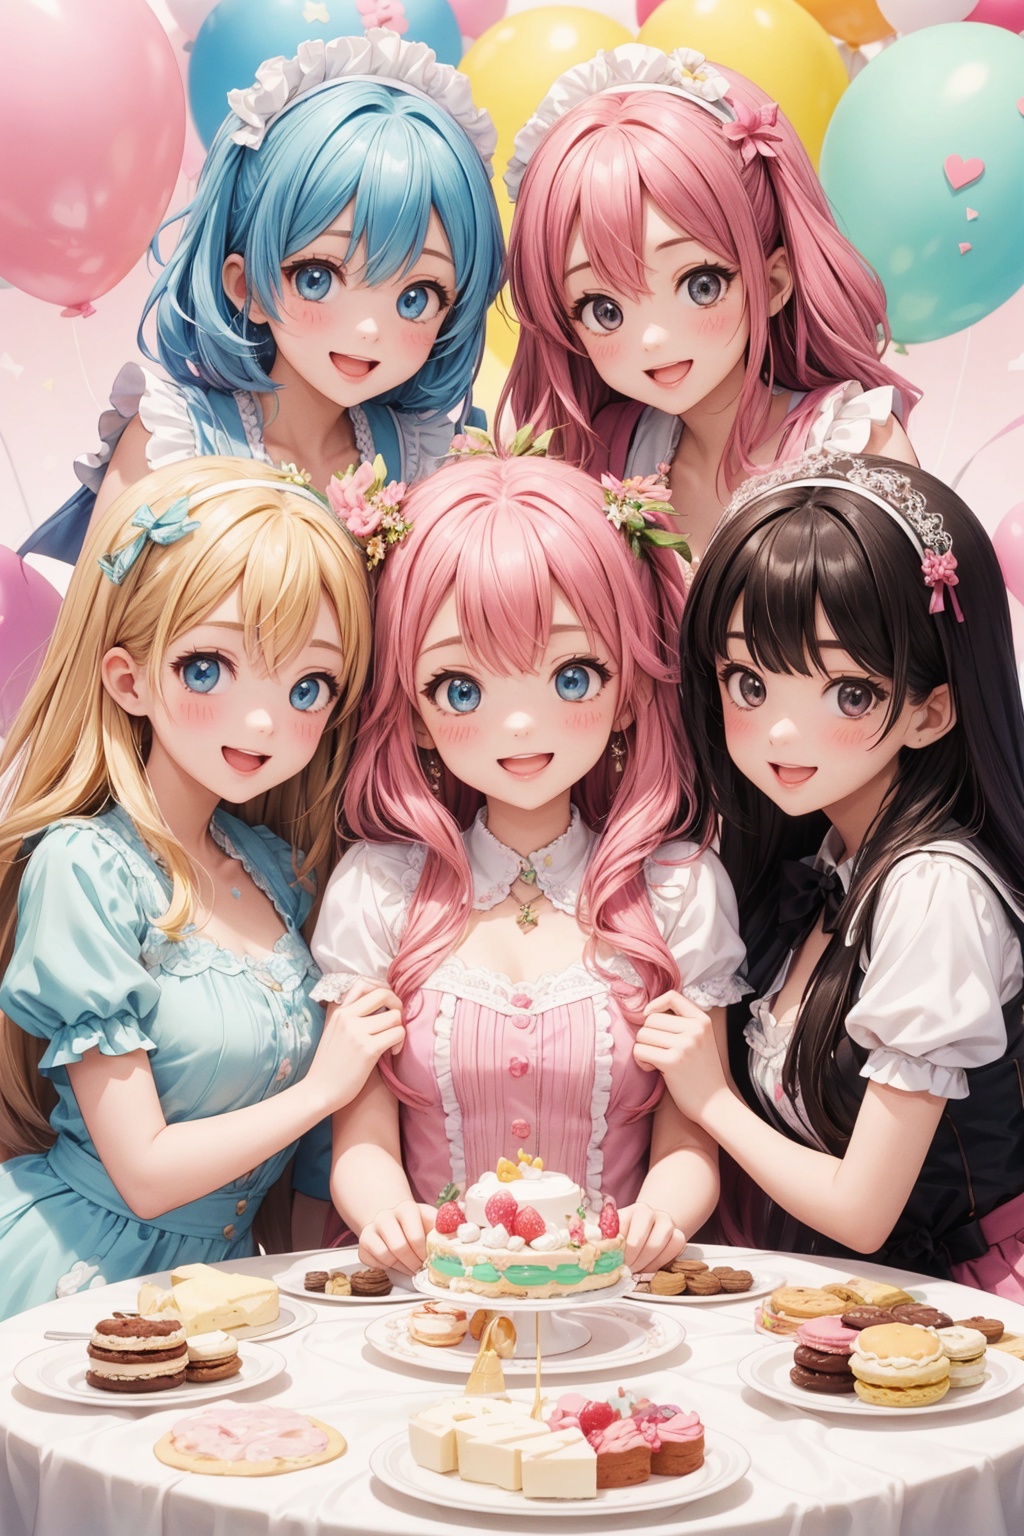 4+ girls, multiple colored hairs, sweet maids, random cute faces, super happy smiling, open mouth, group shot, zoom camera, sweet tea party, lots of cakes, macarons, chocolates, parfaits, cookies, land of sweets